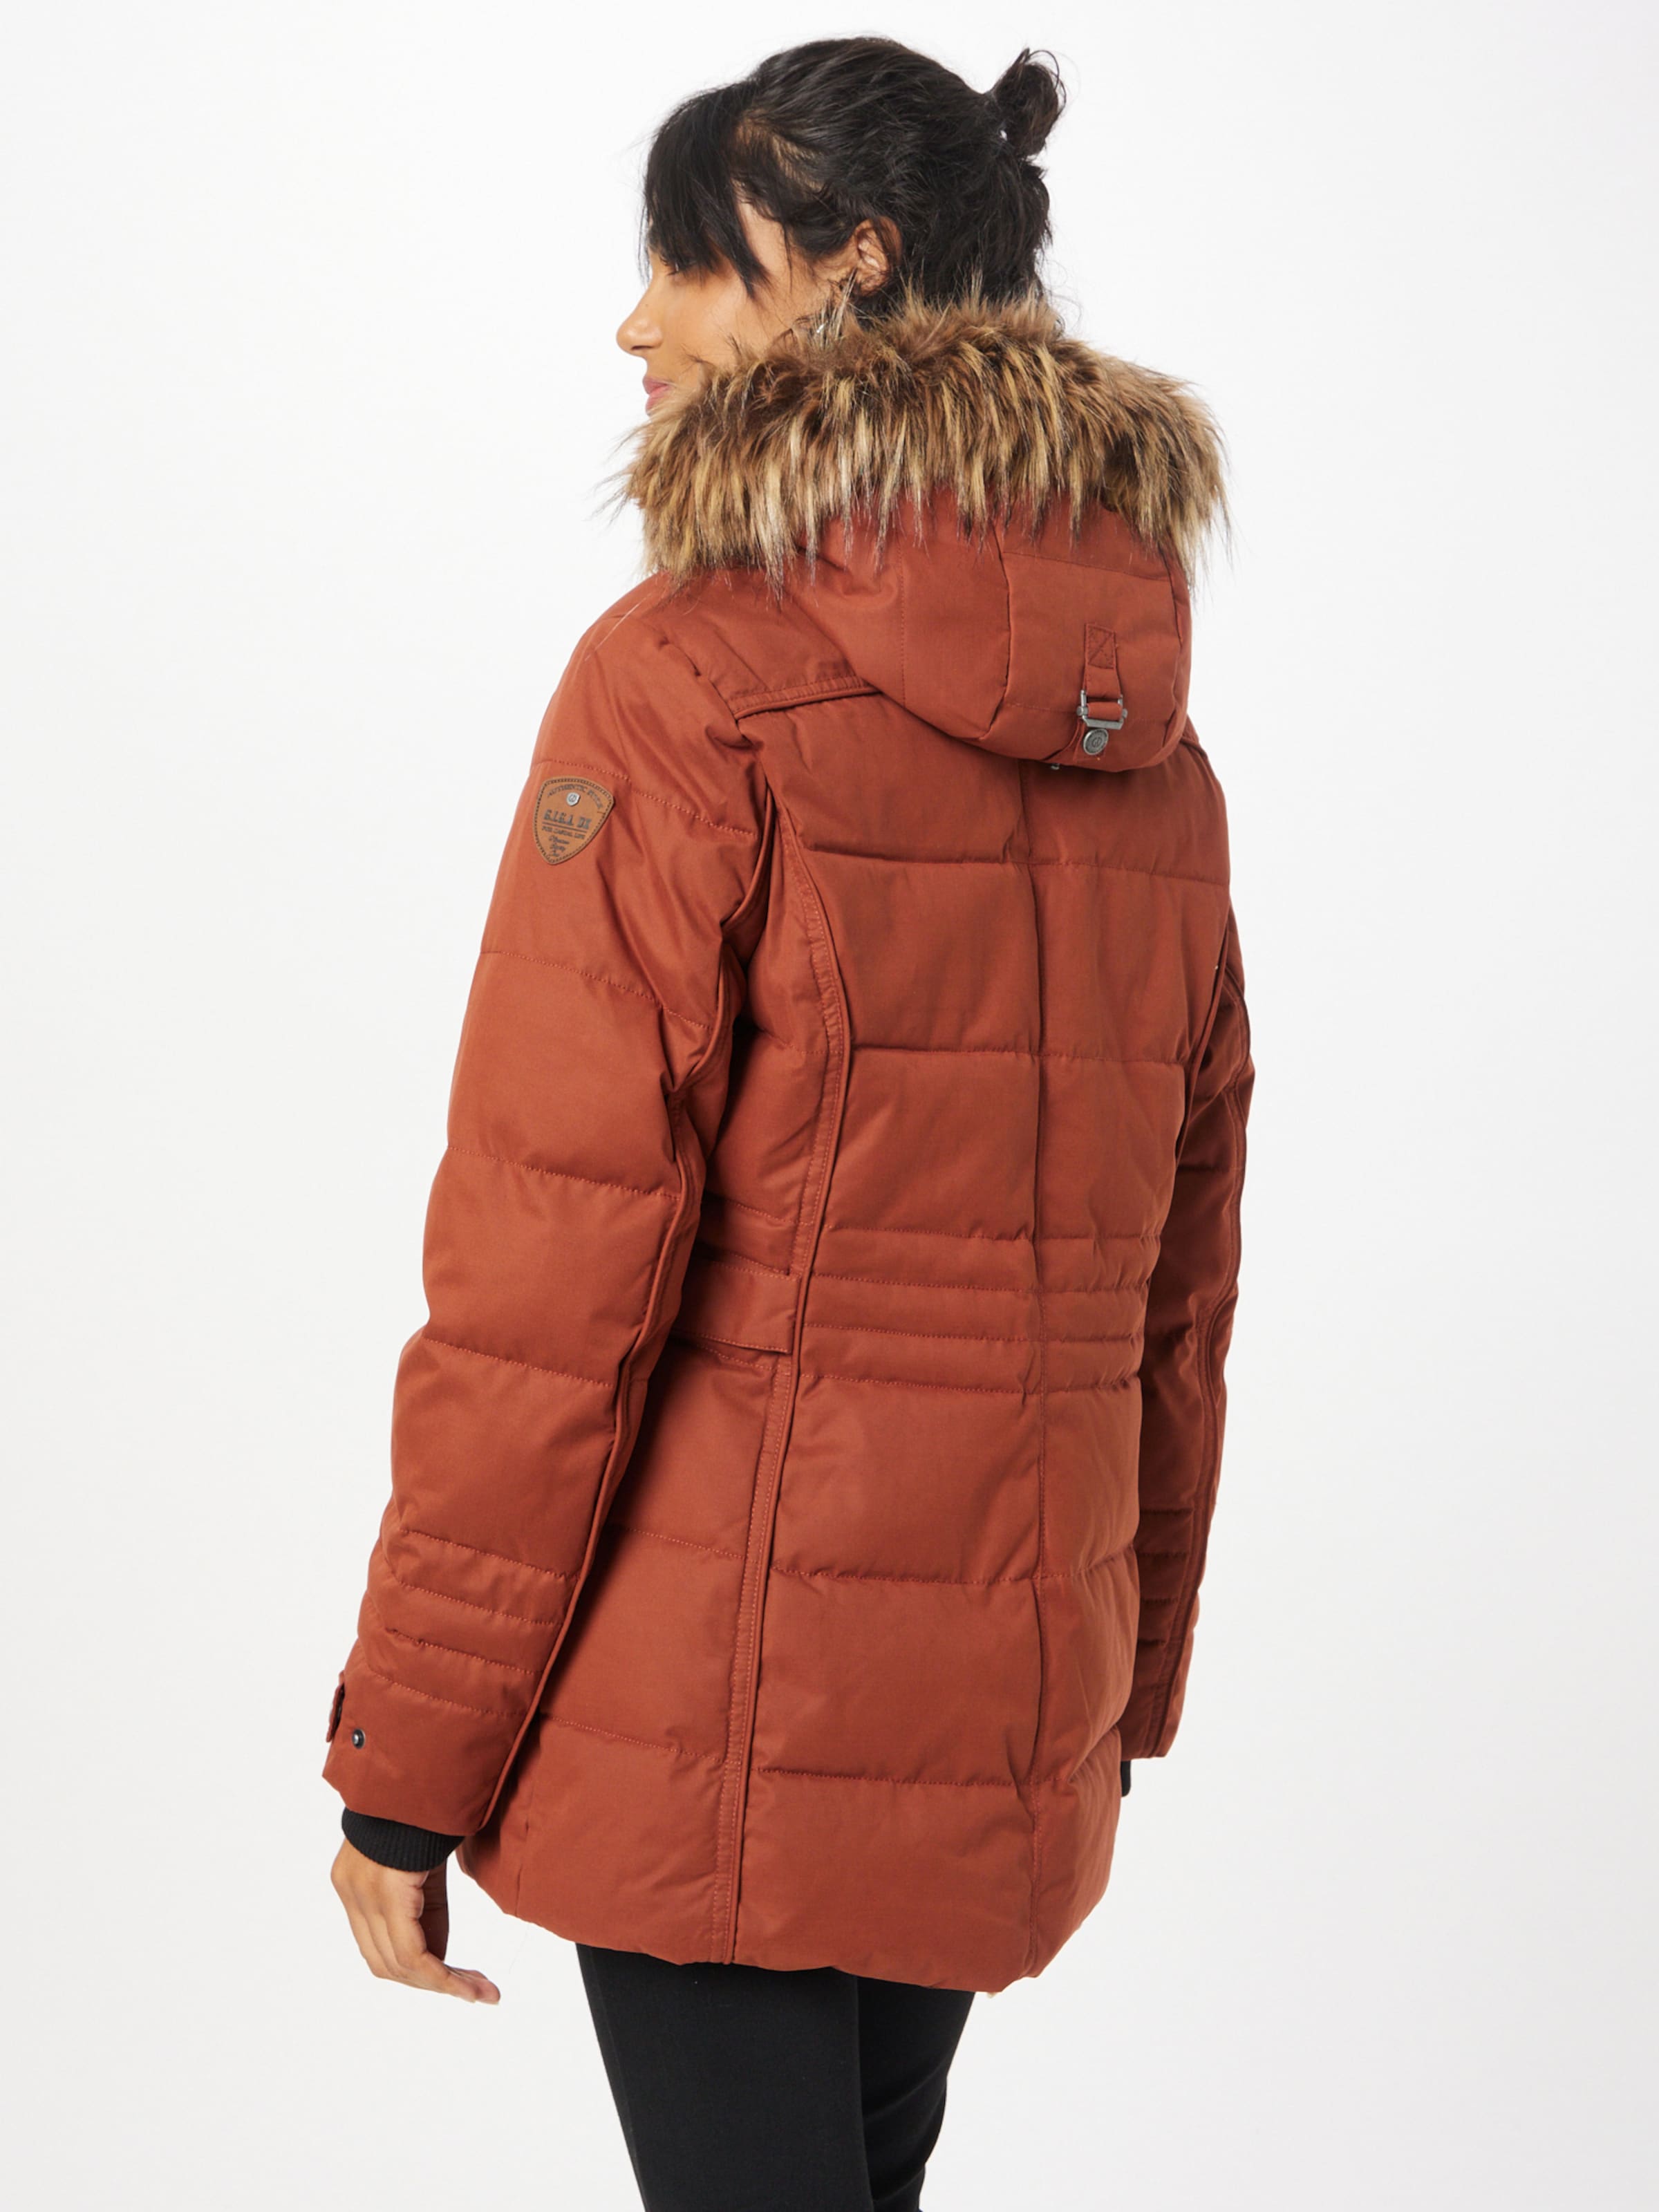 Caramel by DX G.I.G.A. in Outdoor ABOUT | Jacket YOU \'Oiva\' killtec